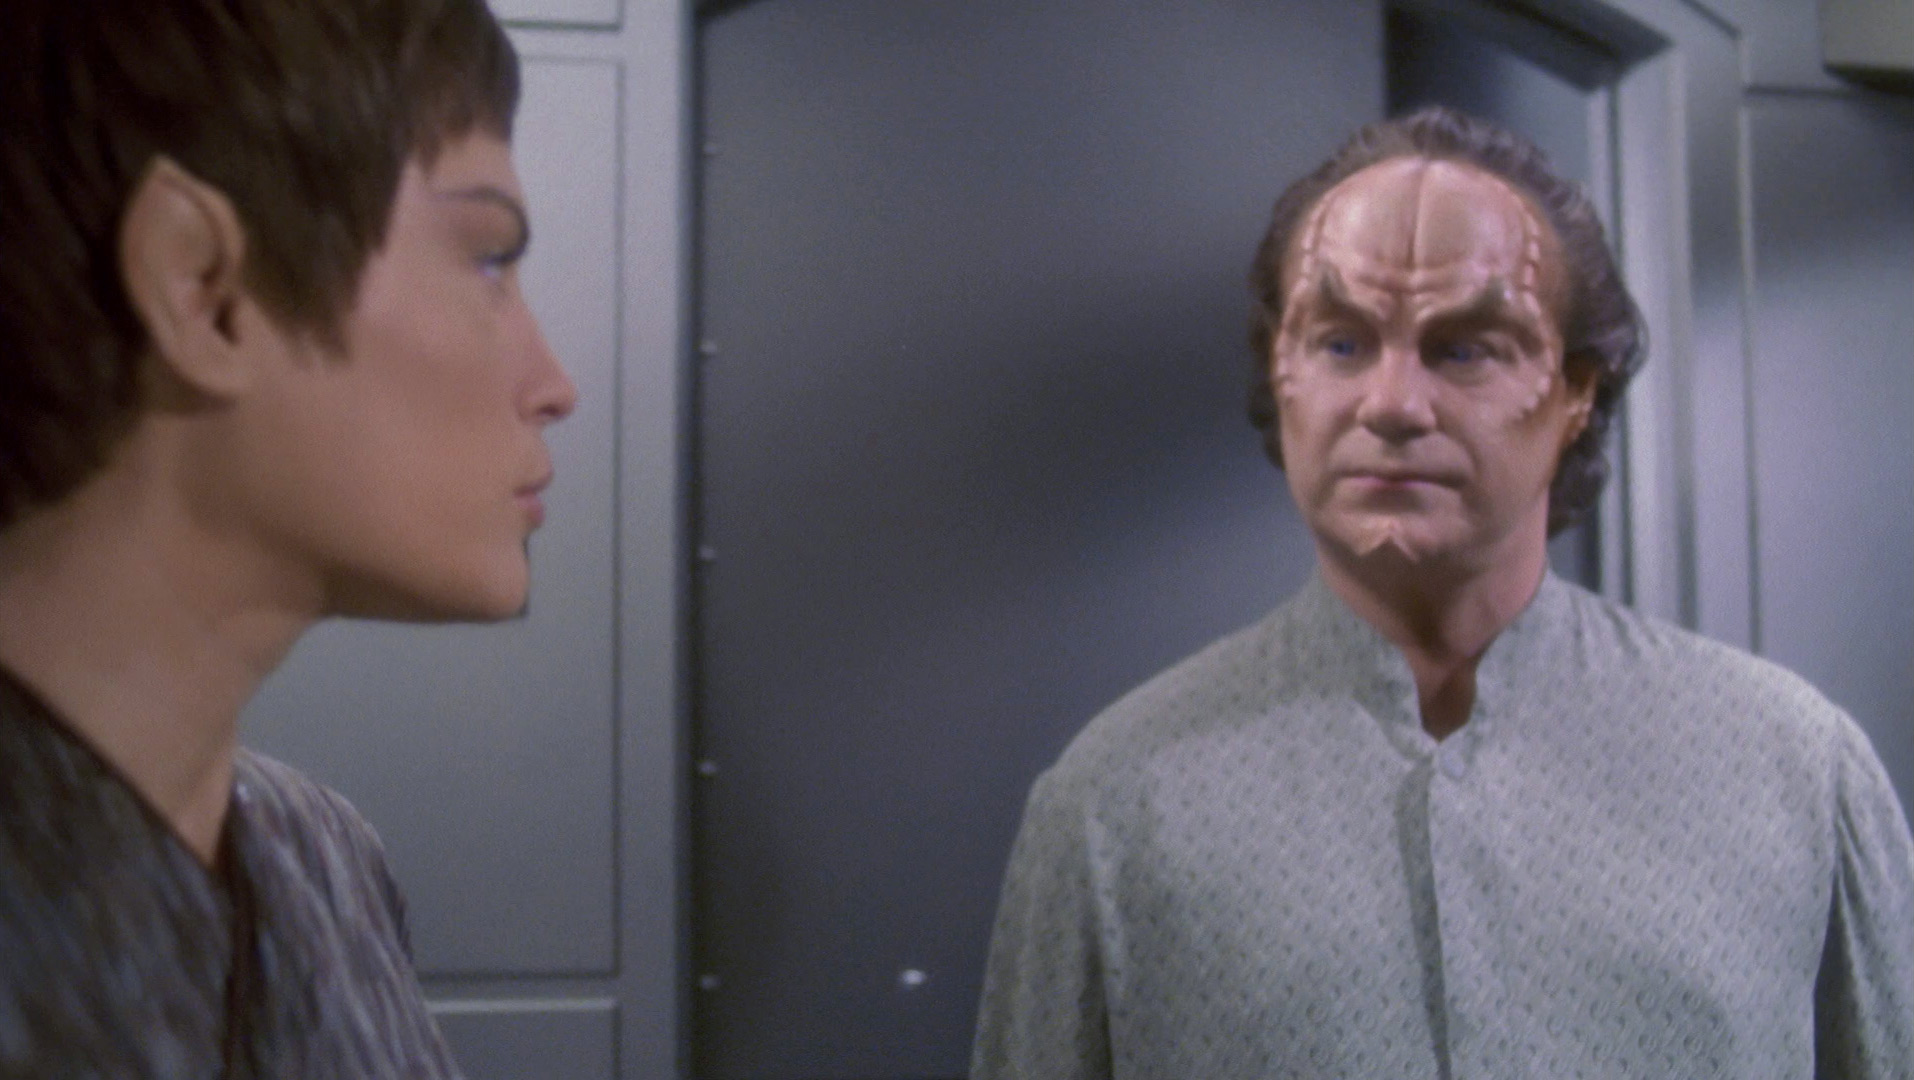 T'Pol and Phlox discuss her condition